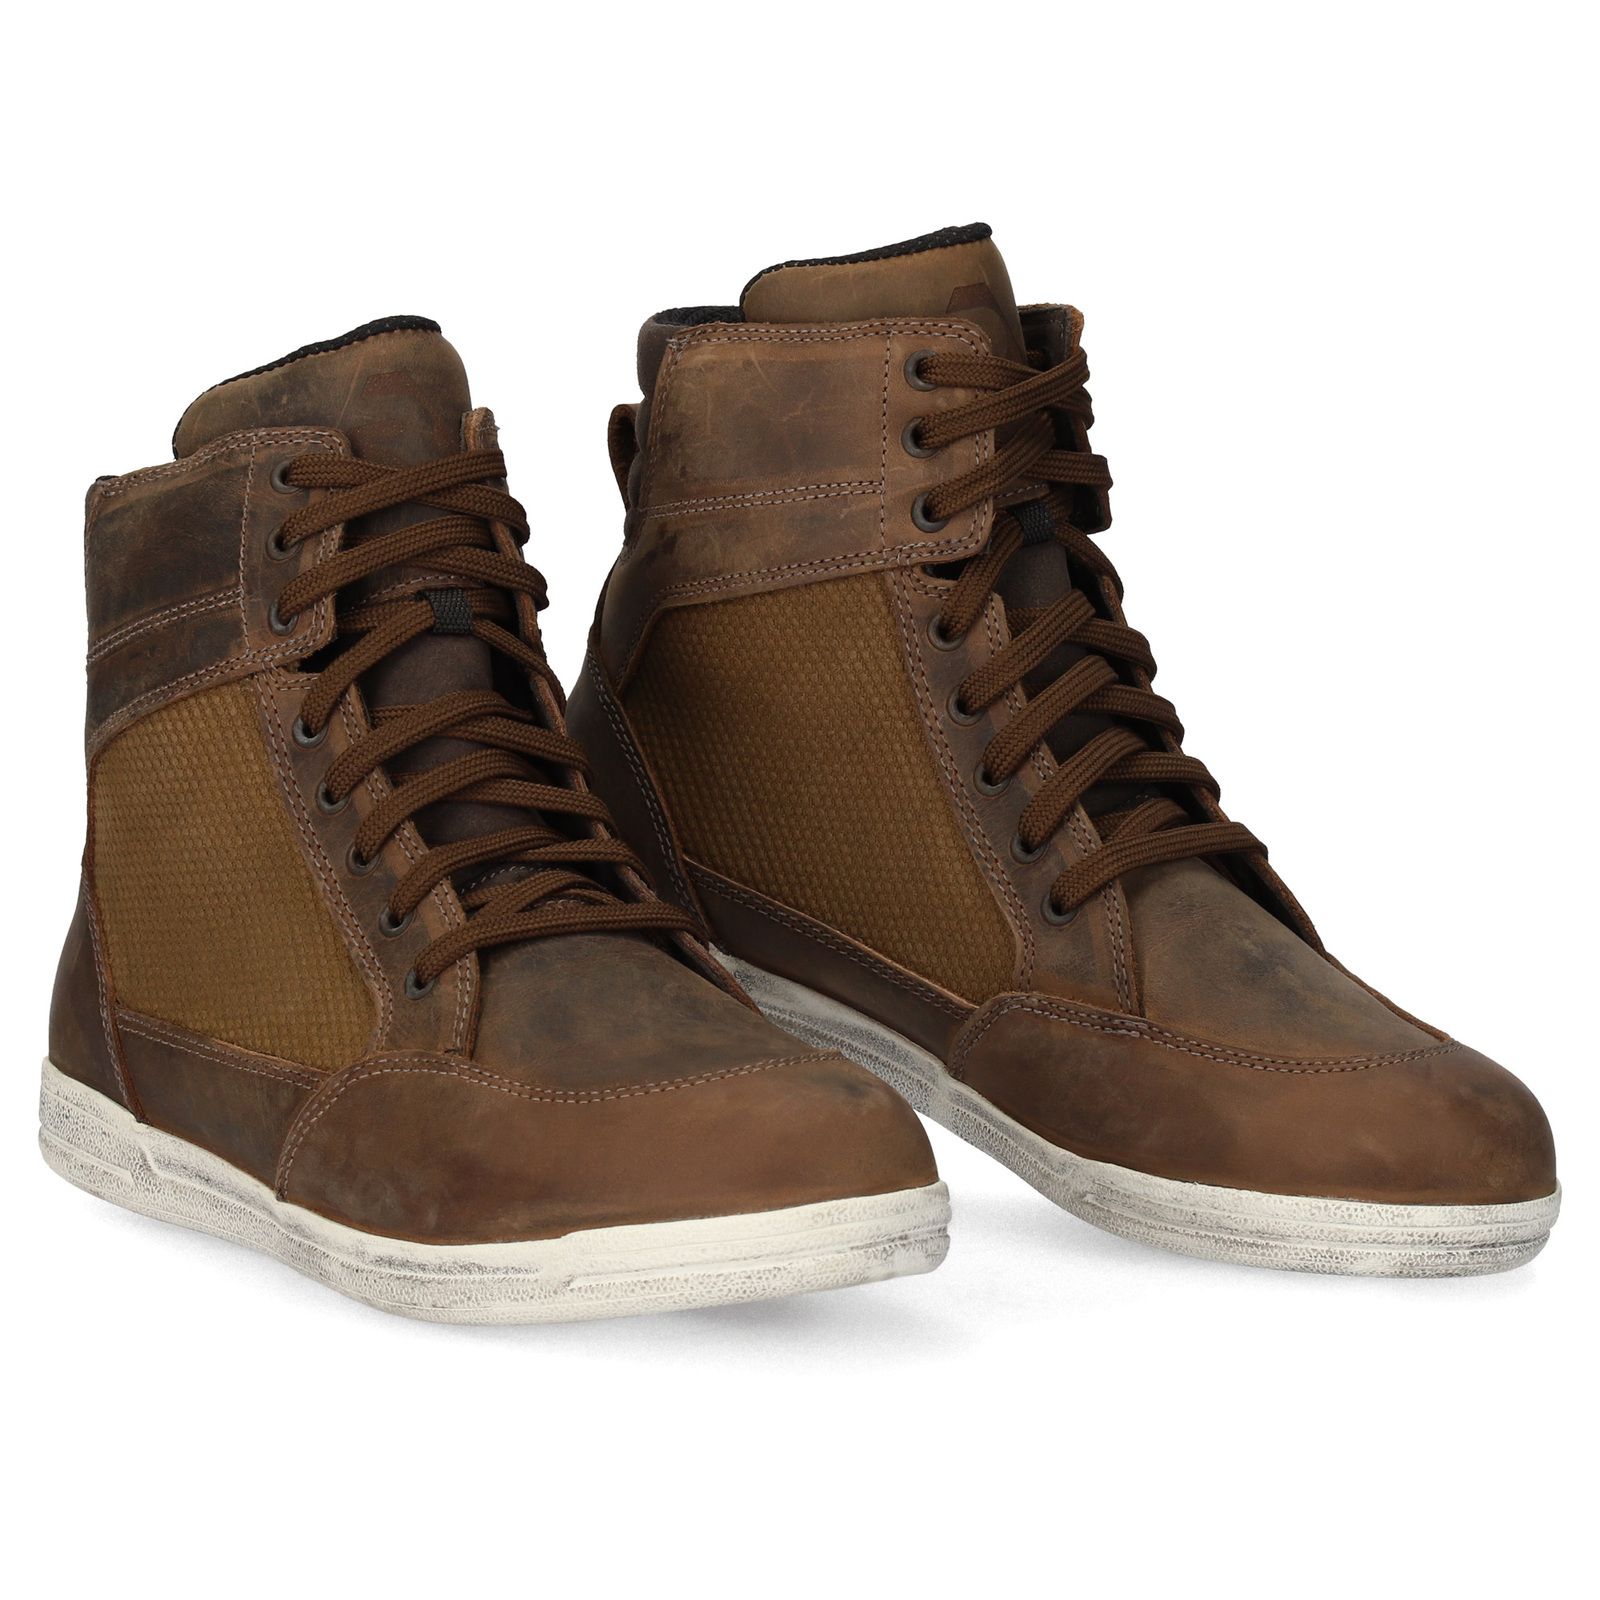 ARGON DIVISION BOOT BROWN